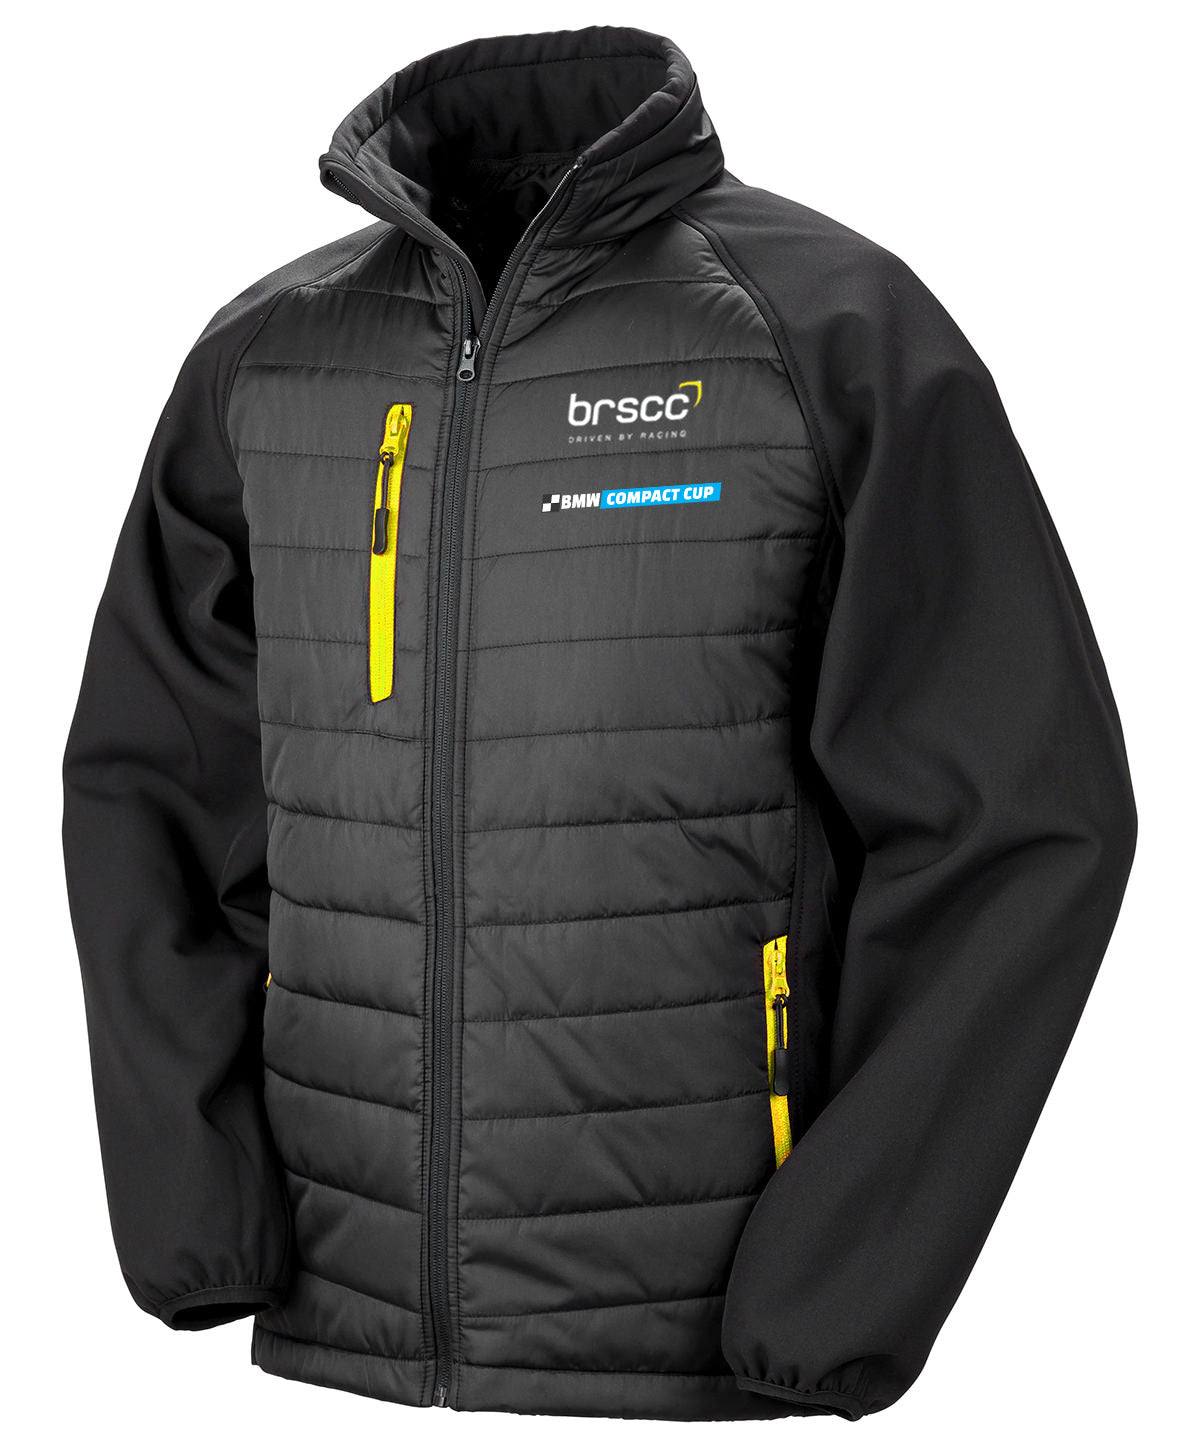 BMW Compact Cup Unisex Padded Softshell Jacket